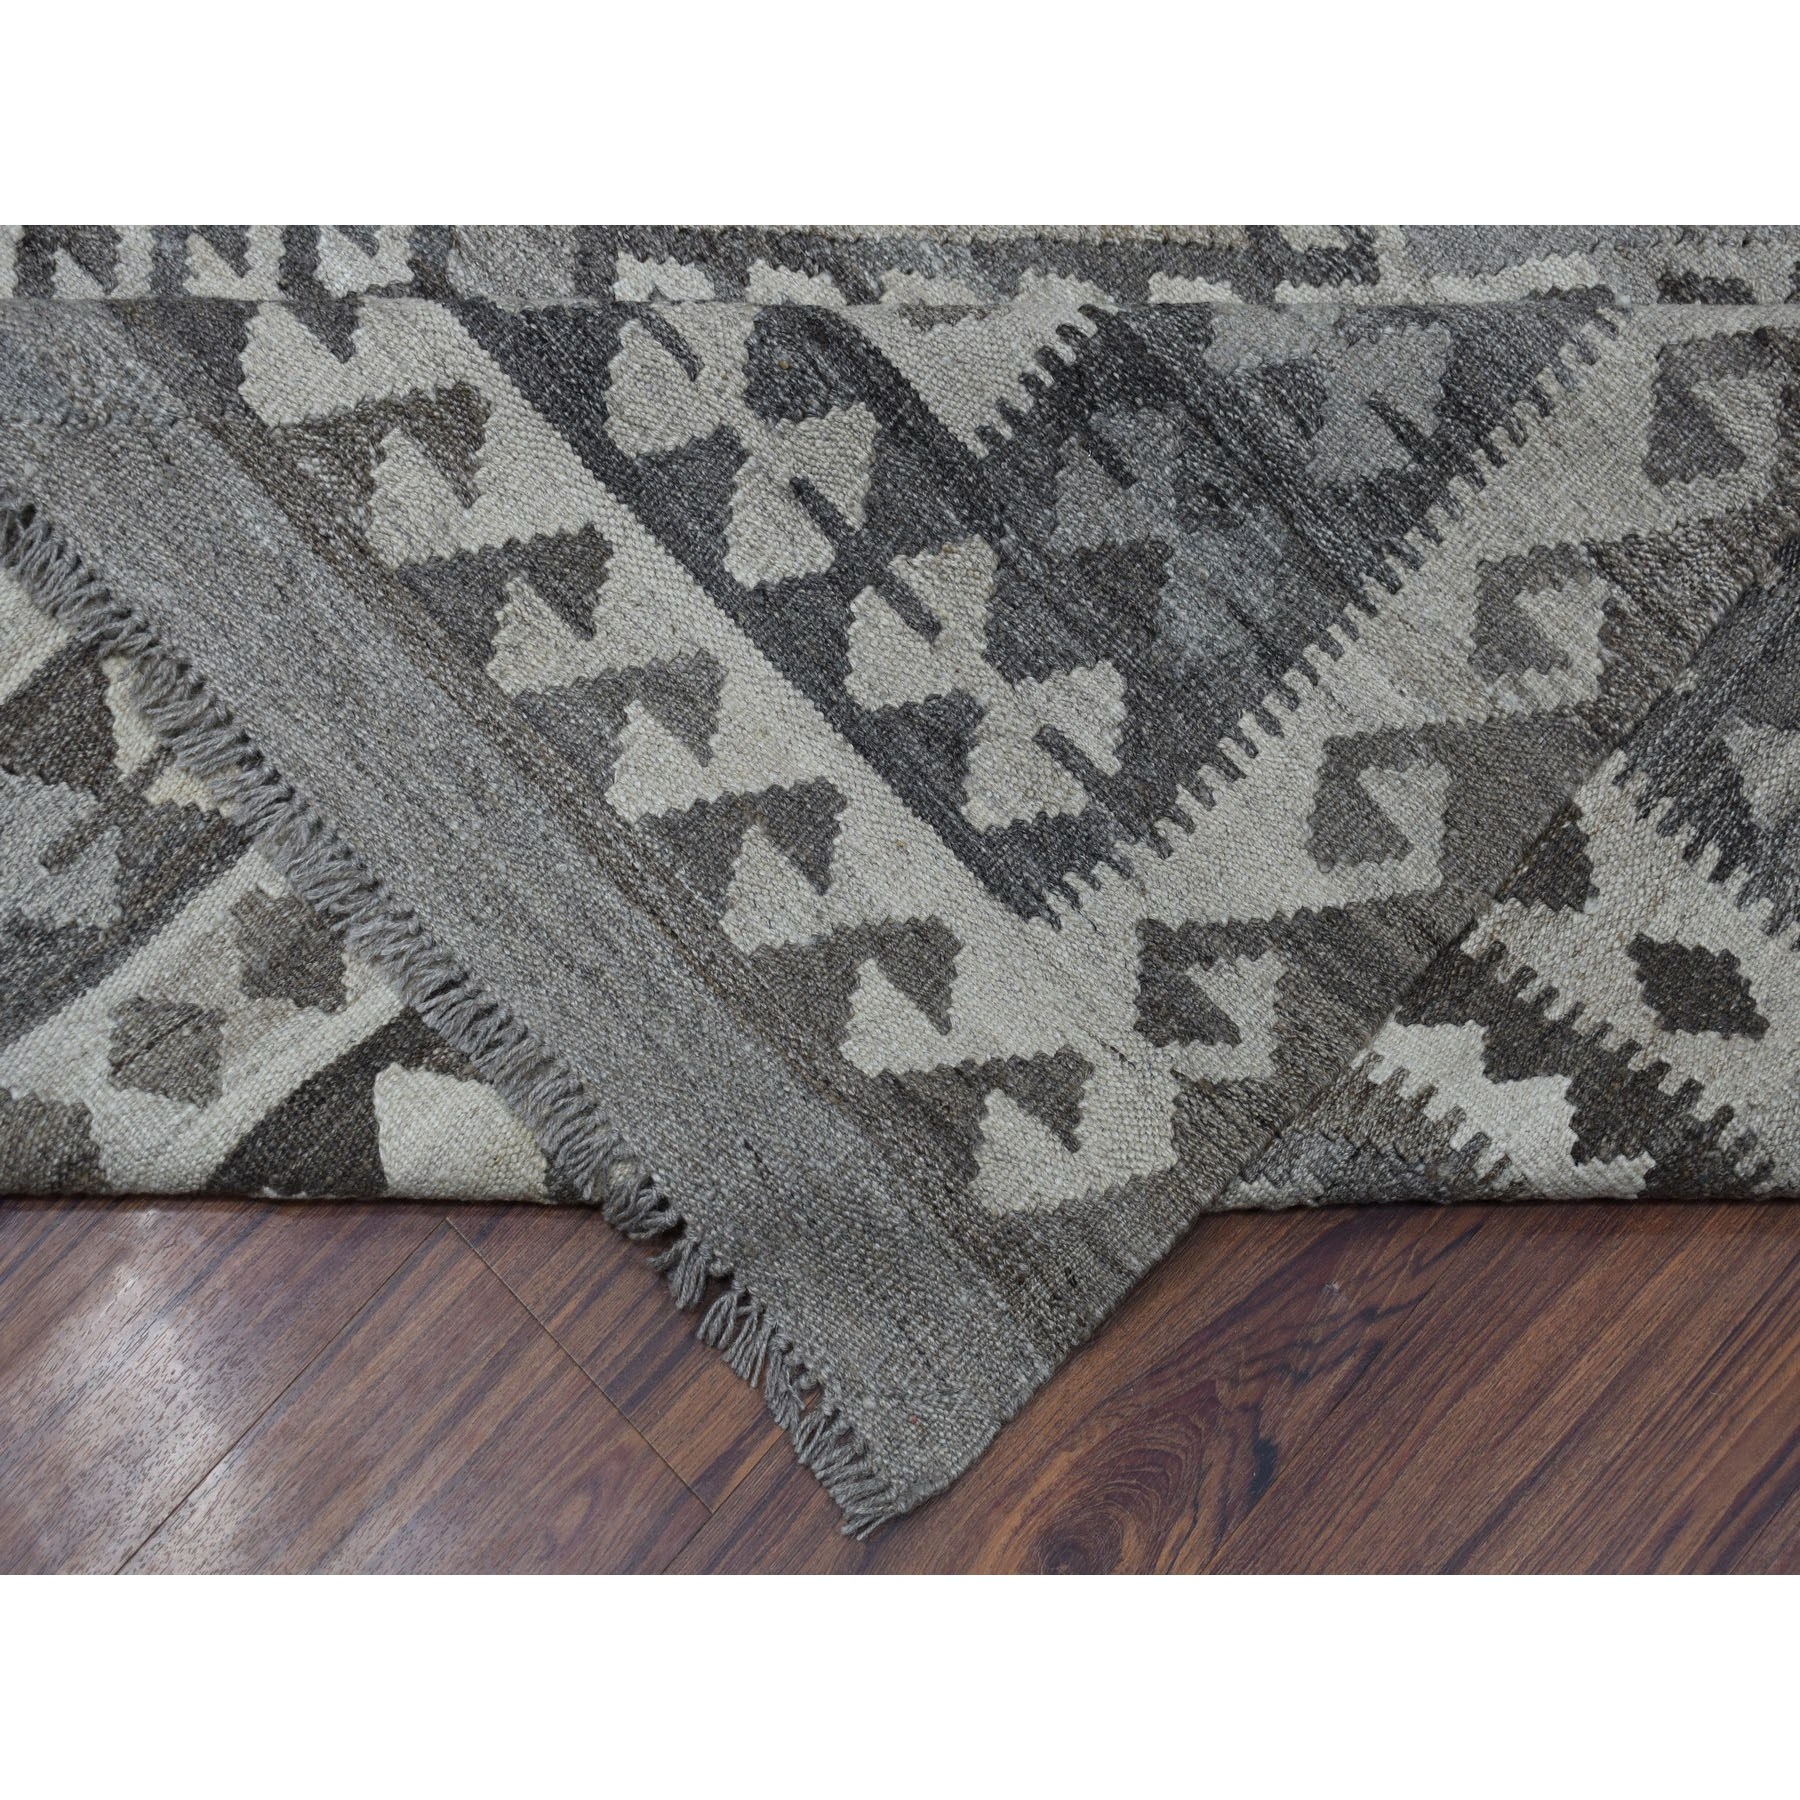 8-3 x9-7  Undyed Natural Wool Afghan Kilim Reversible Hand Woven Oriental Rug 